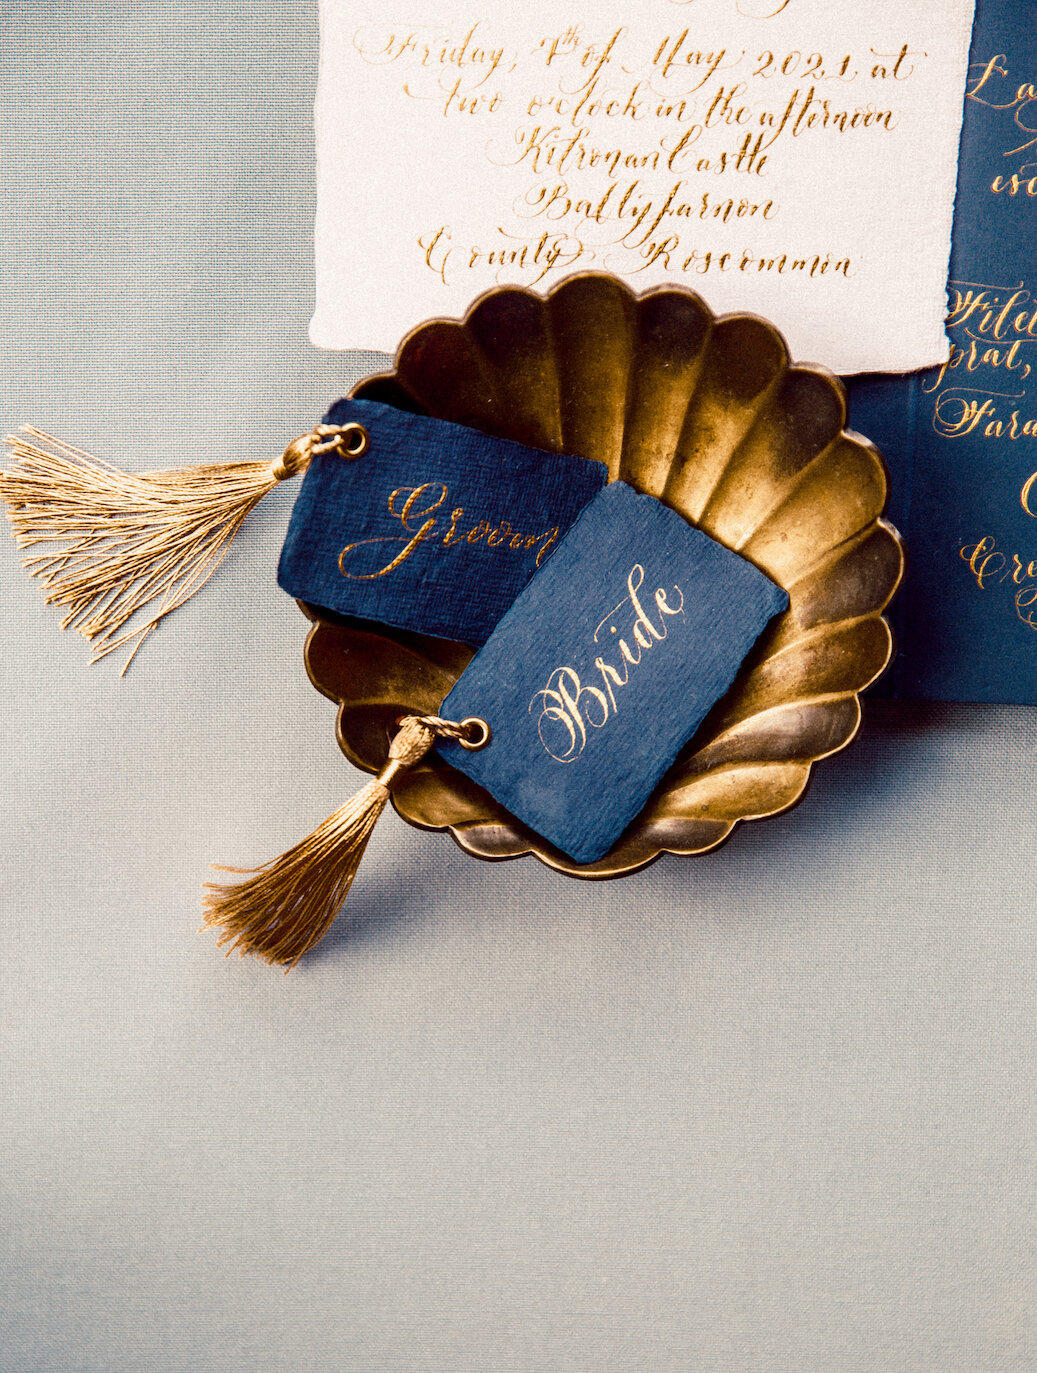 Cotton Paper place cards by calligraphy by laura.jpg